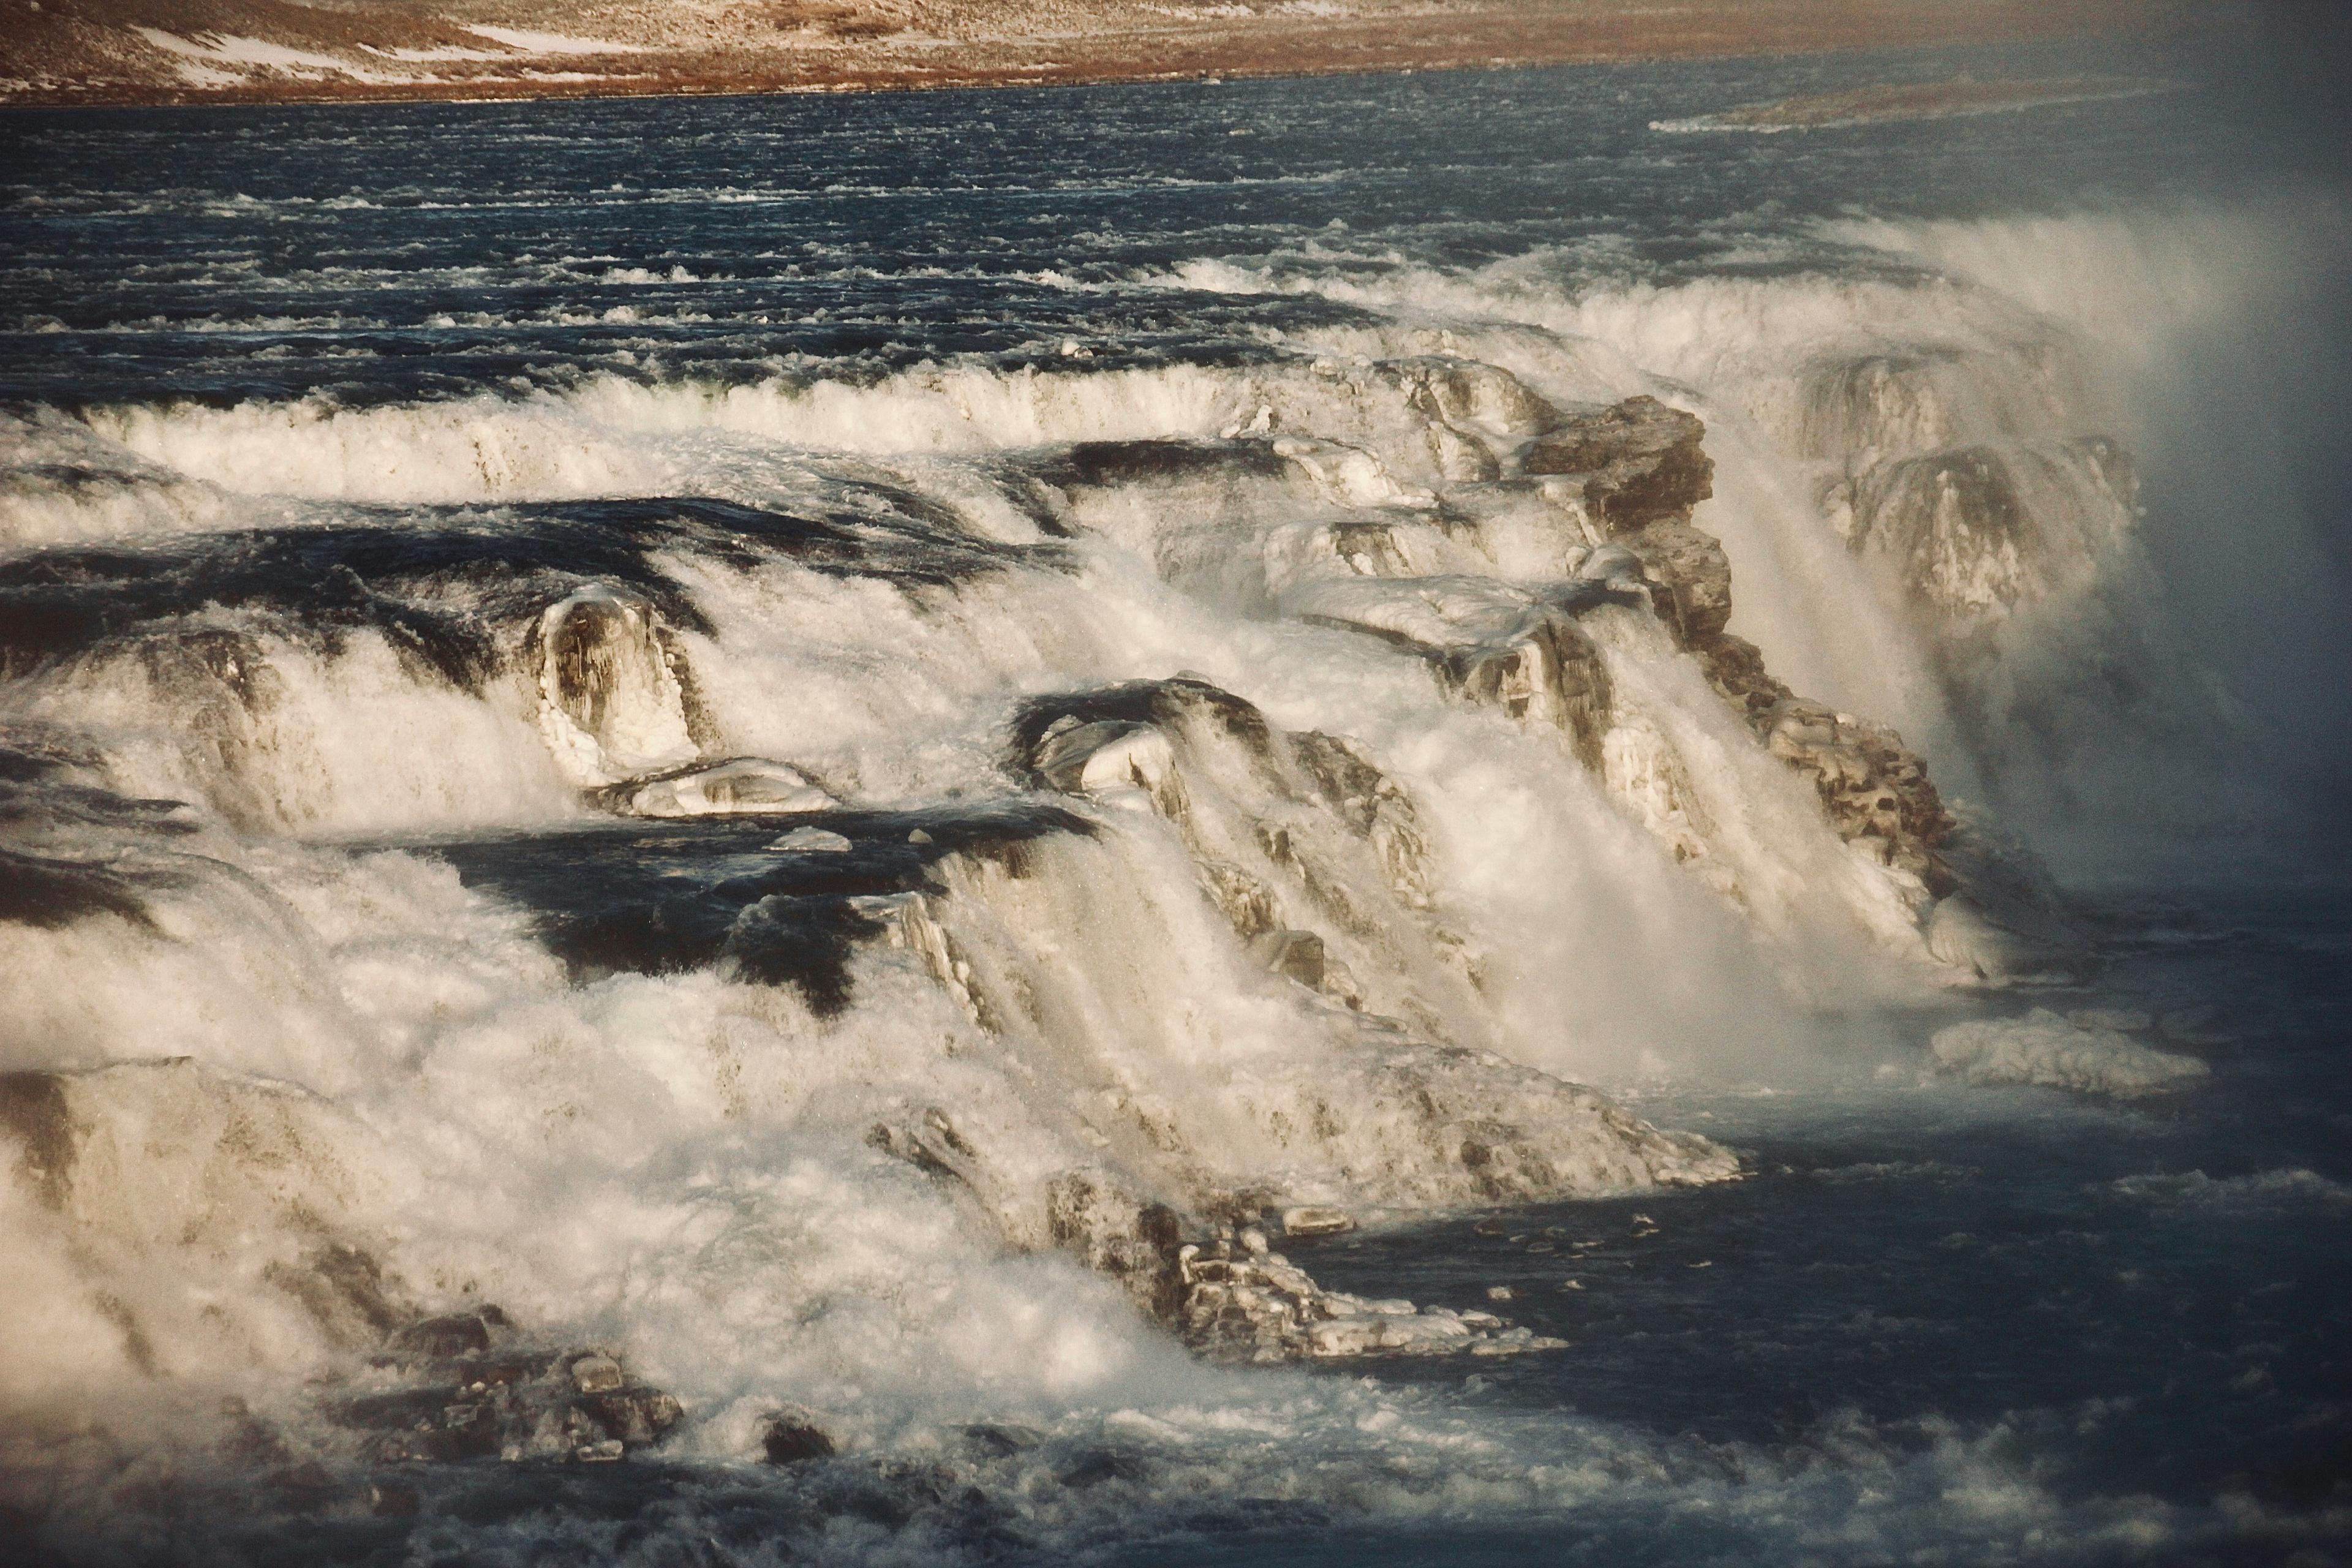 A close-up view of a cascading waterfall, its waters frothing and flowing rapidly over the rocks, likely a section of a larger falls in Iceland.